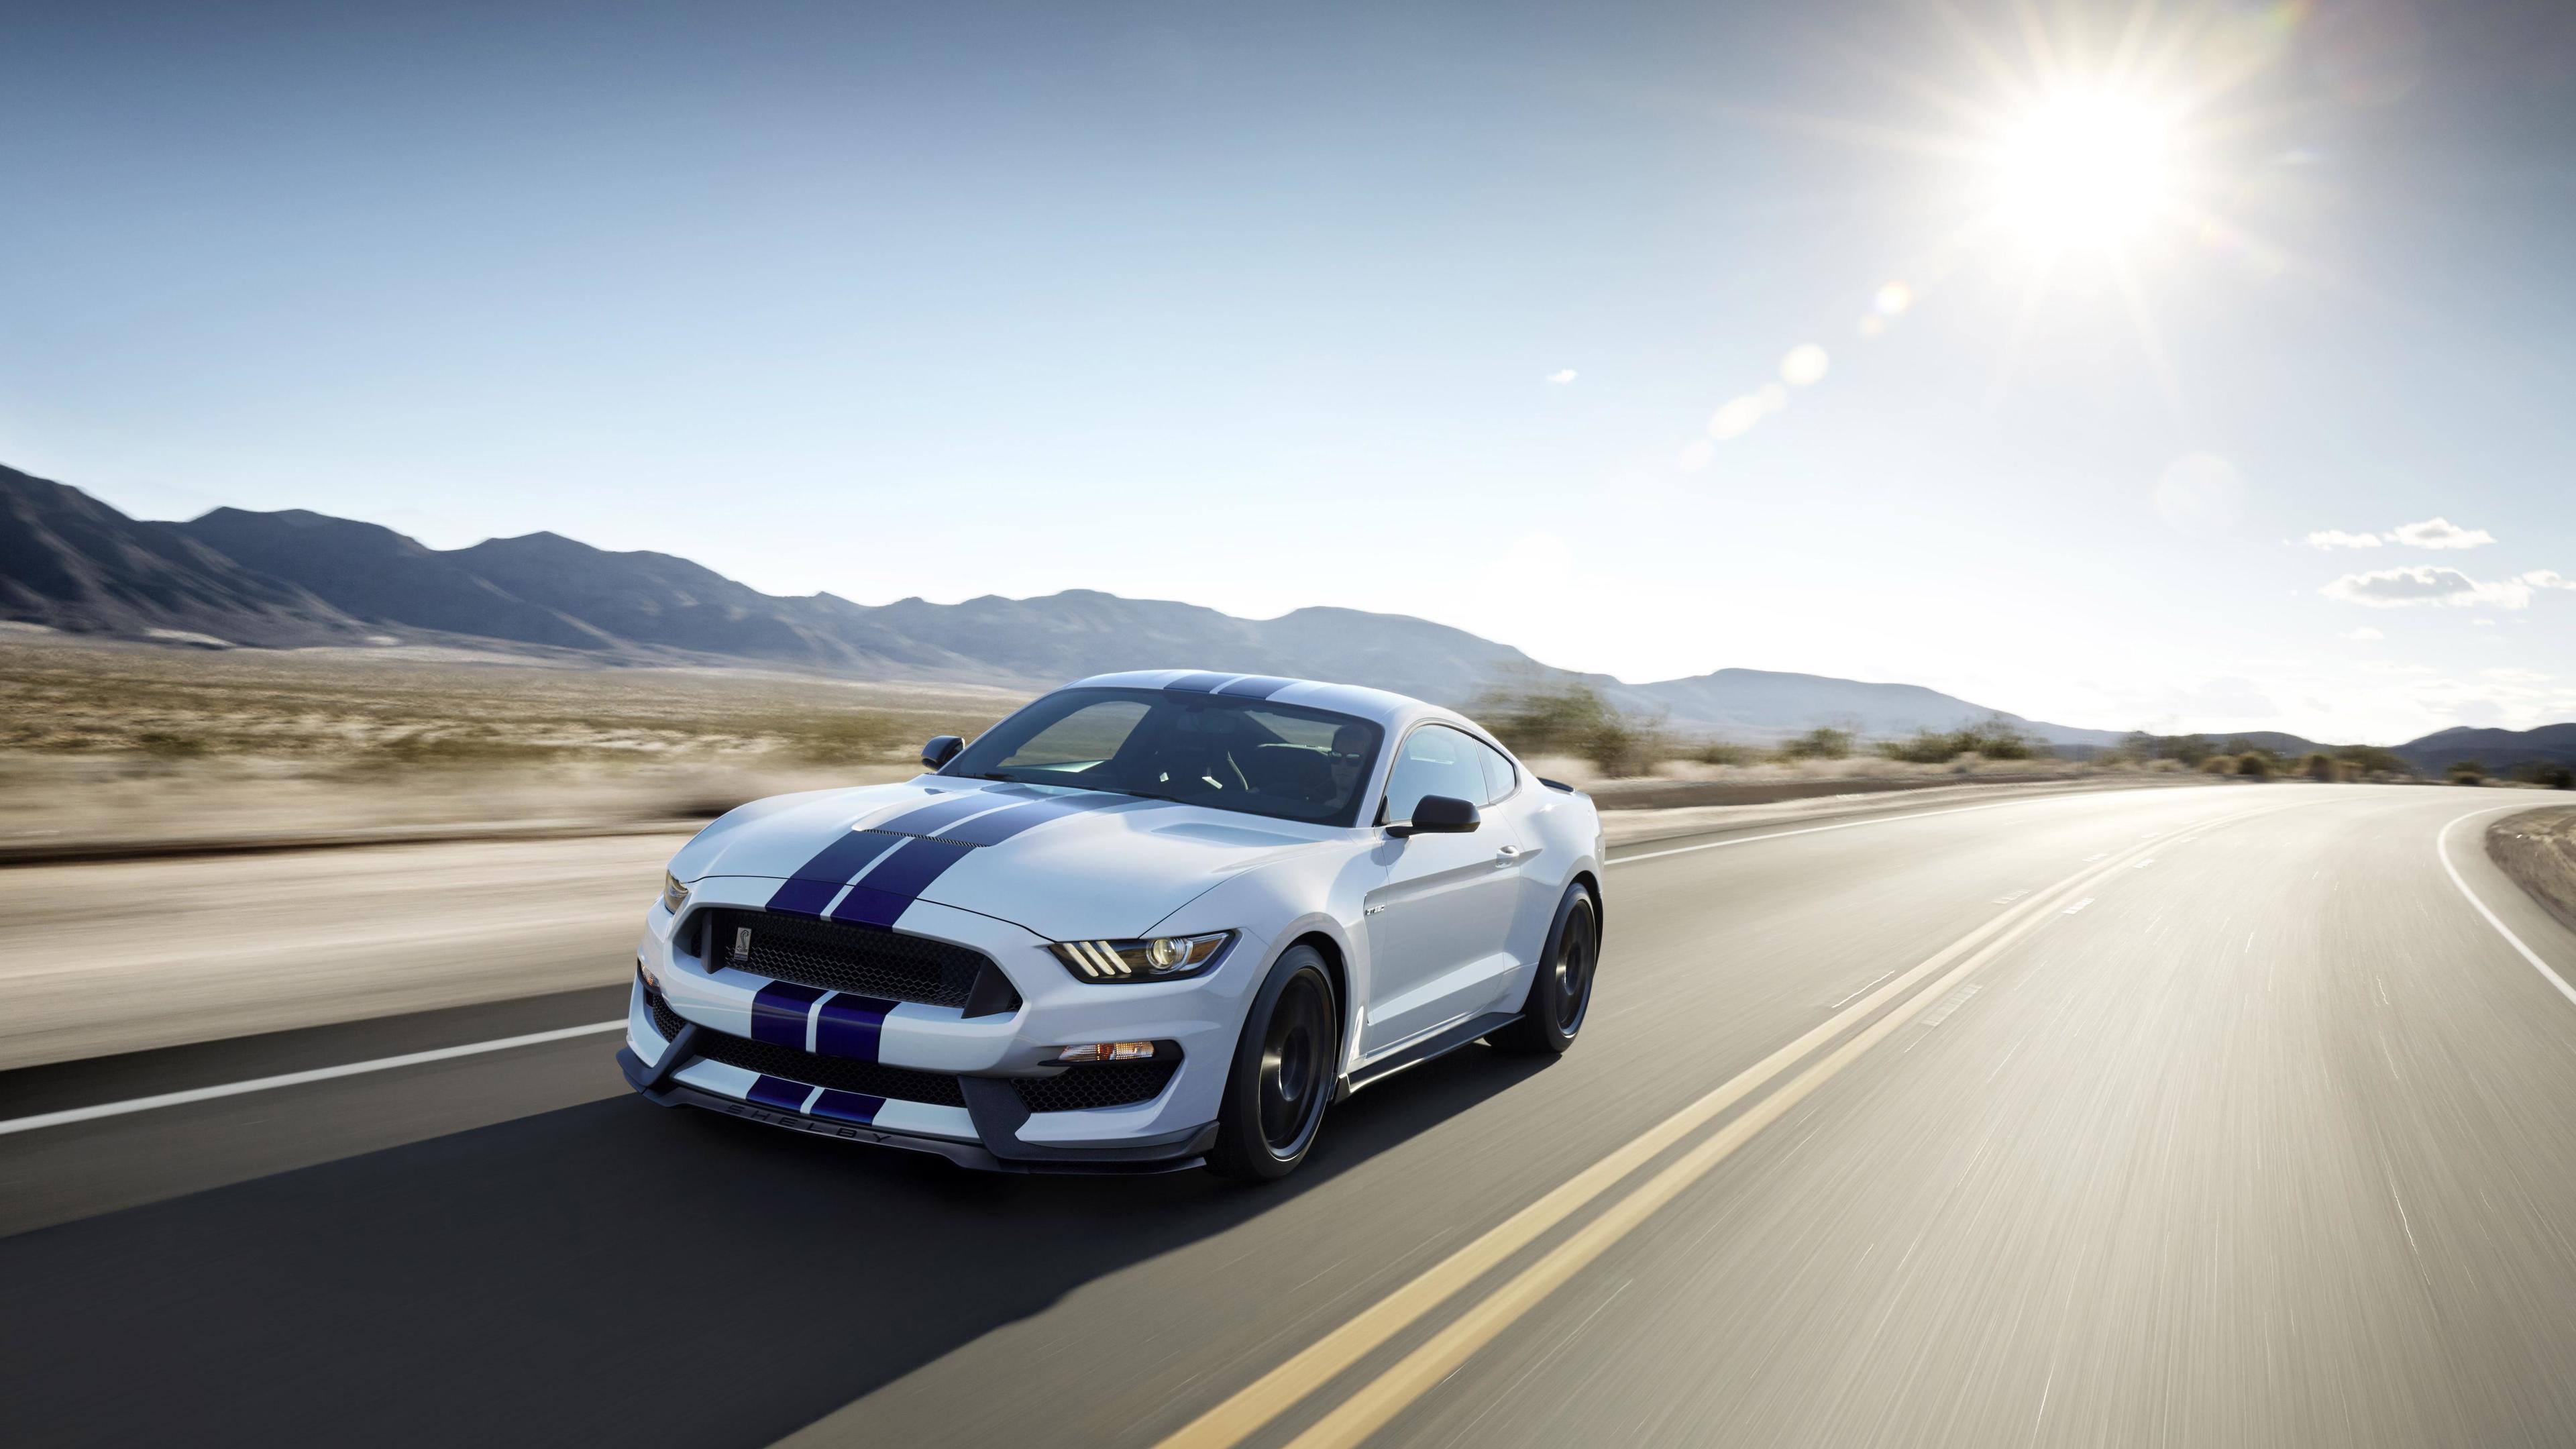 Ford Mustang Shelby Gt500 2 - HD Wallpaper 